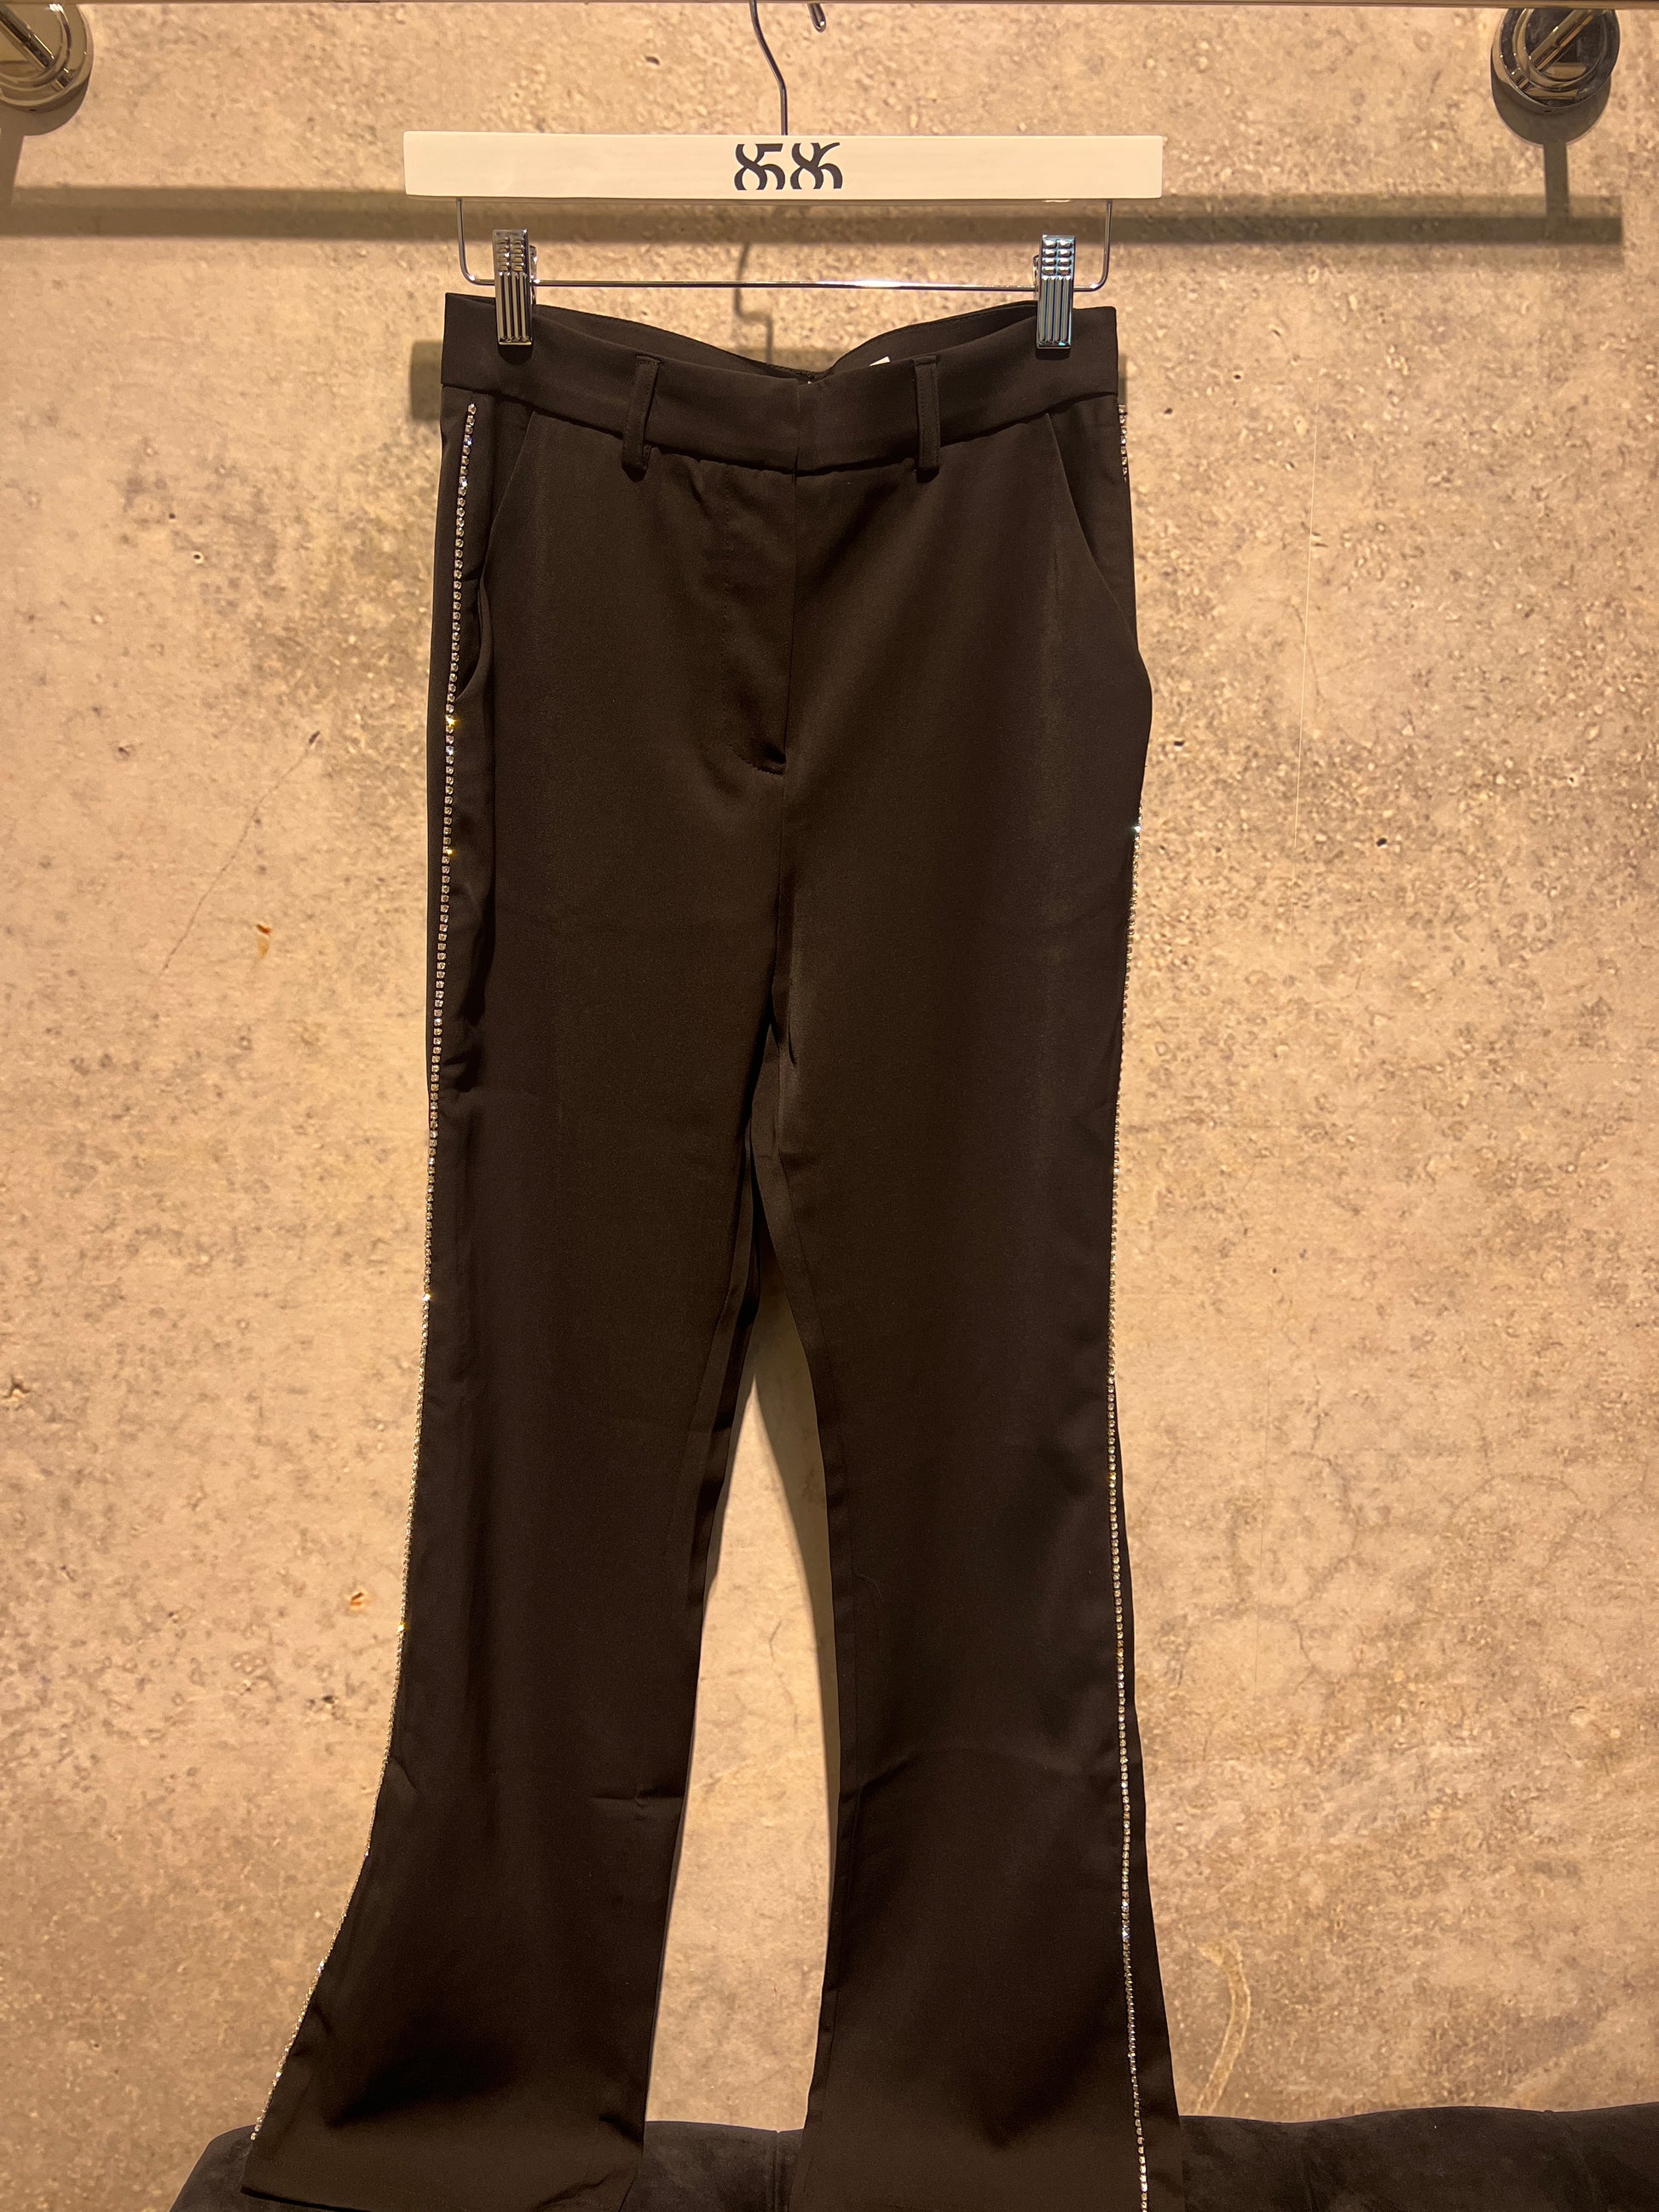 BEULAH: Crystal Trouser Pants (front view)